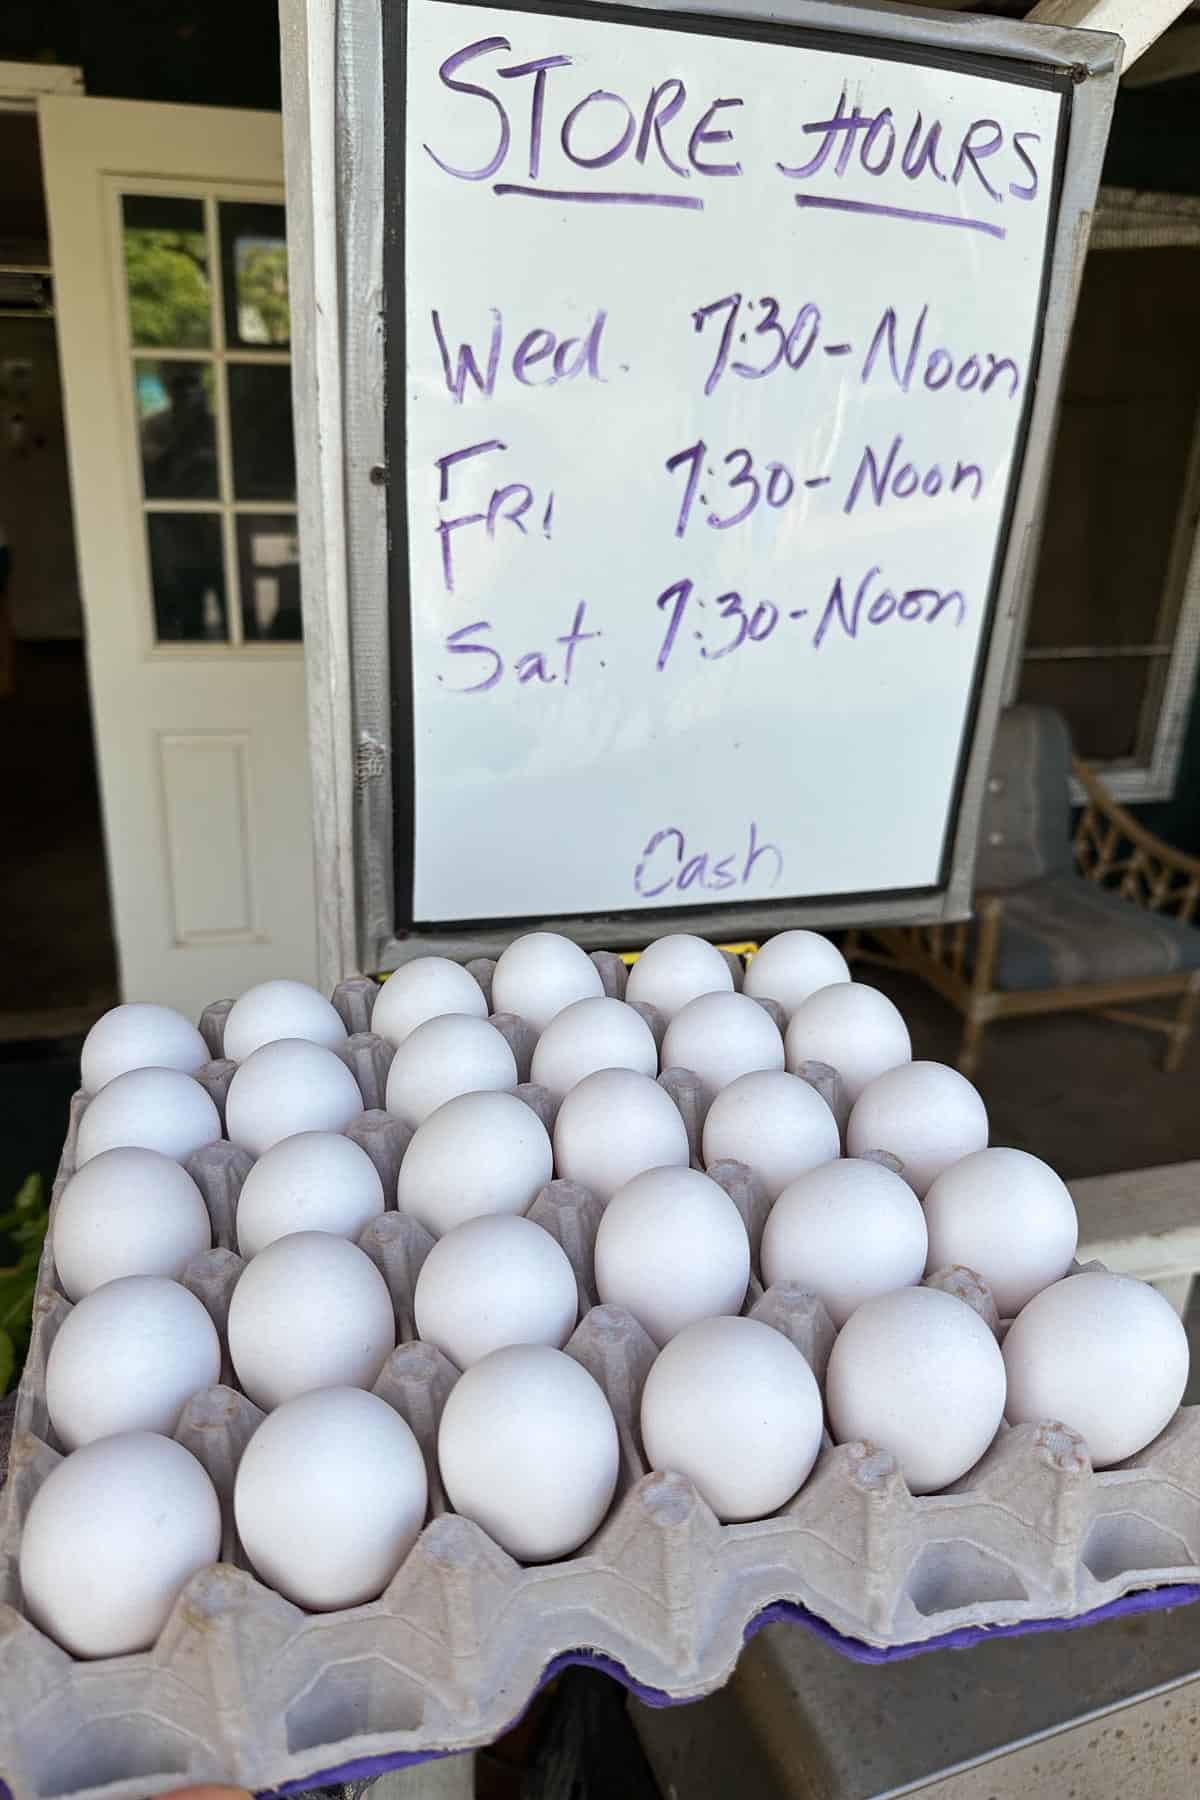 Eggs from OK Poultry.